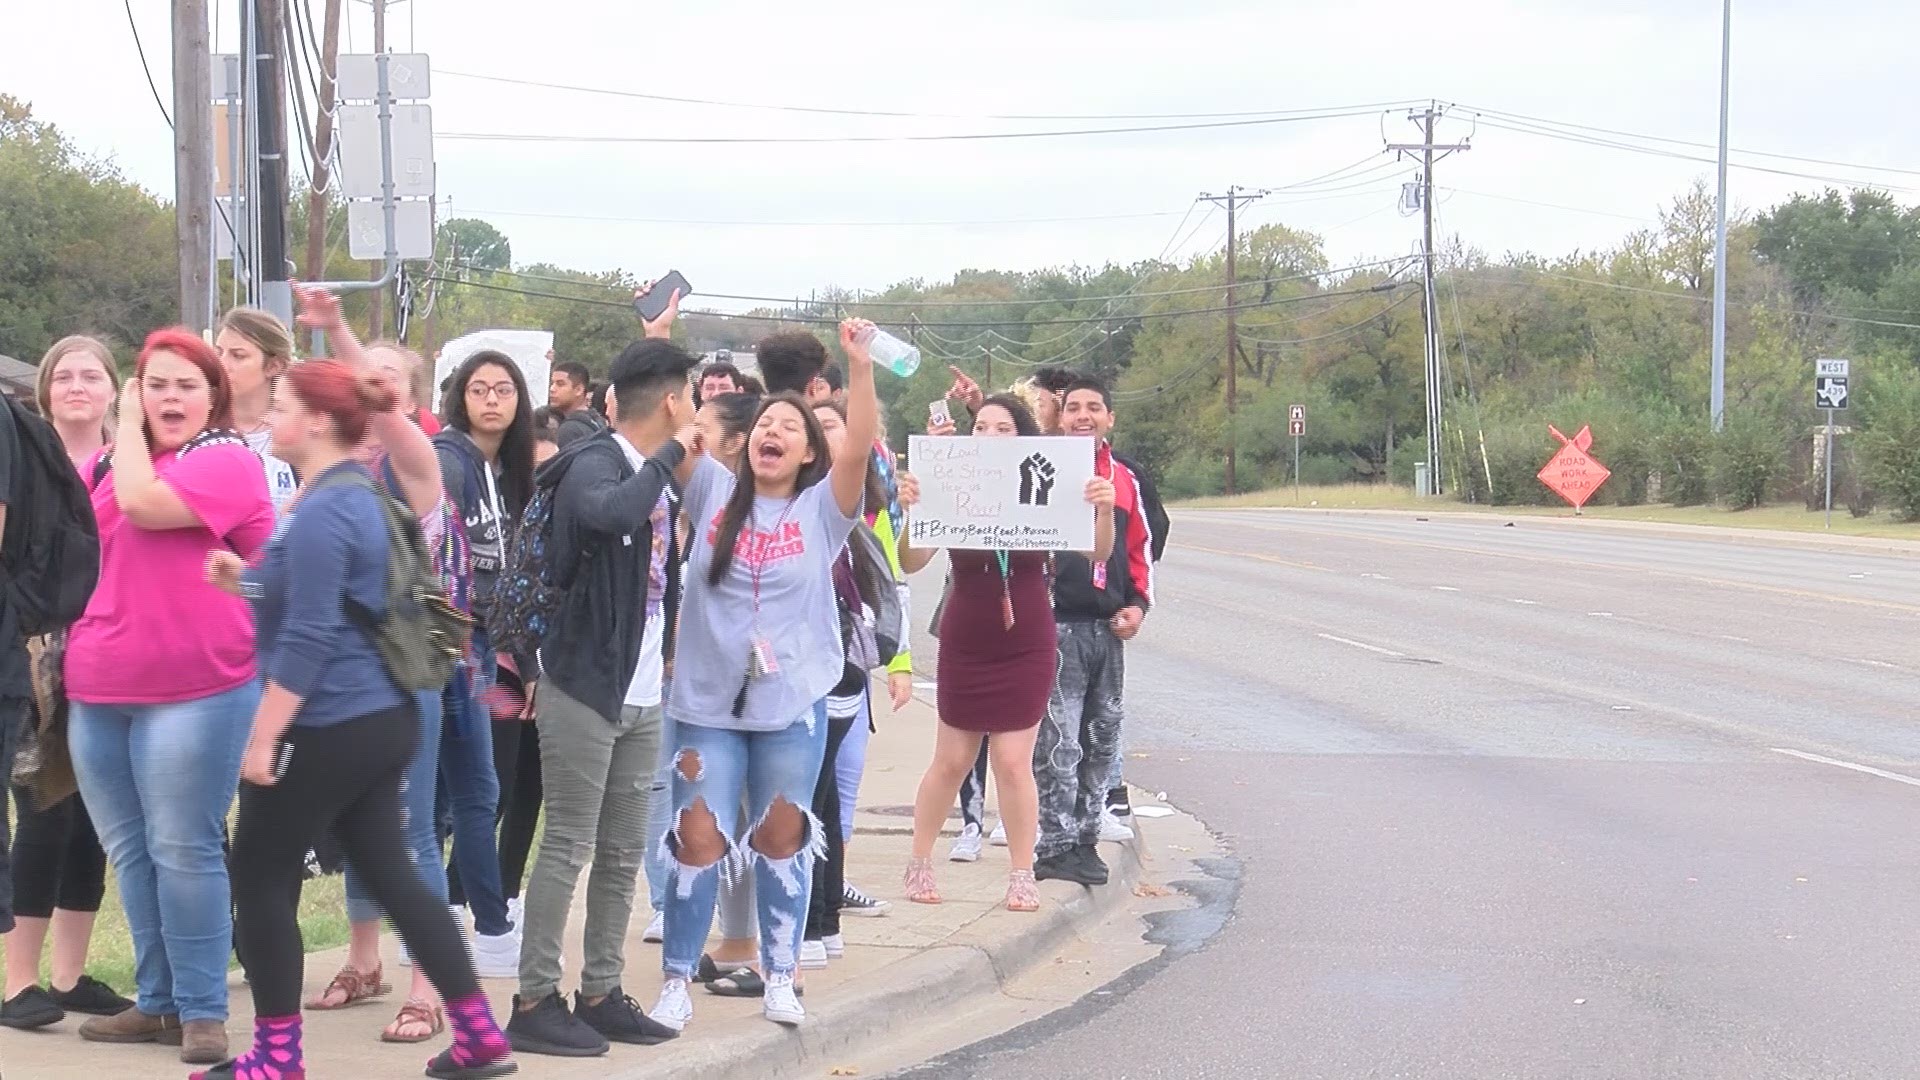 VIDEO: Belton ISD students protest removal of football coach | www.semadata.org